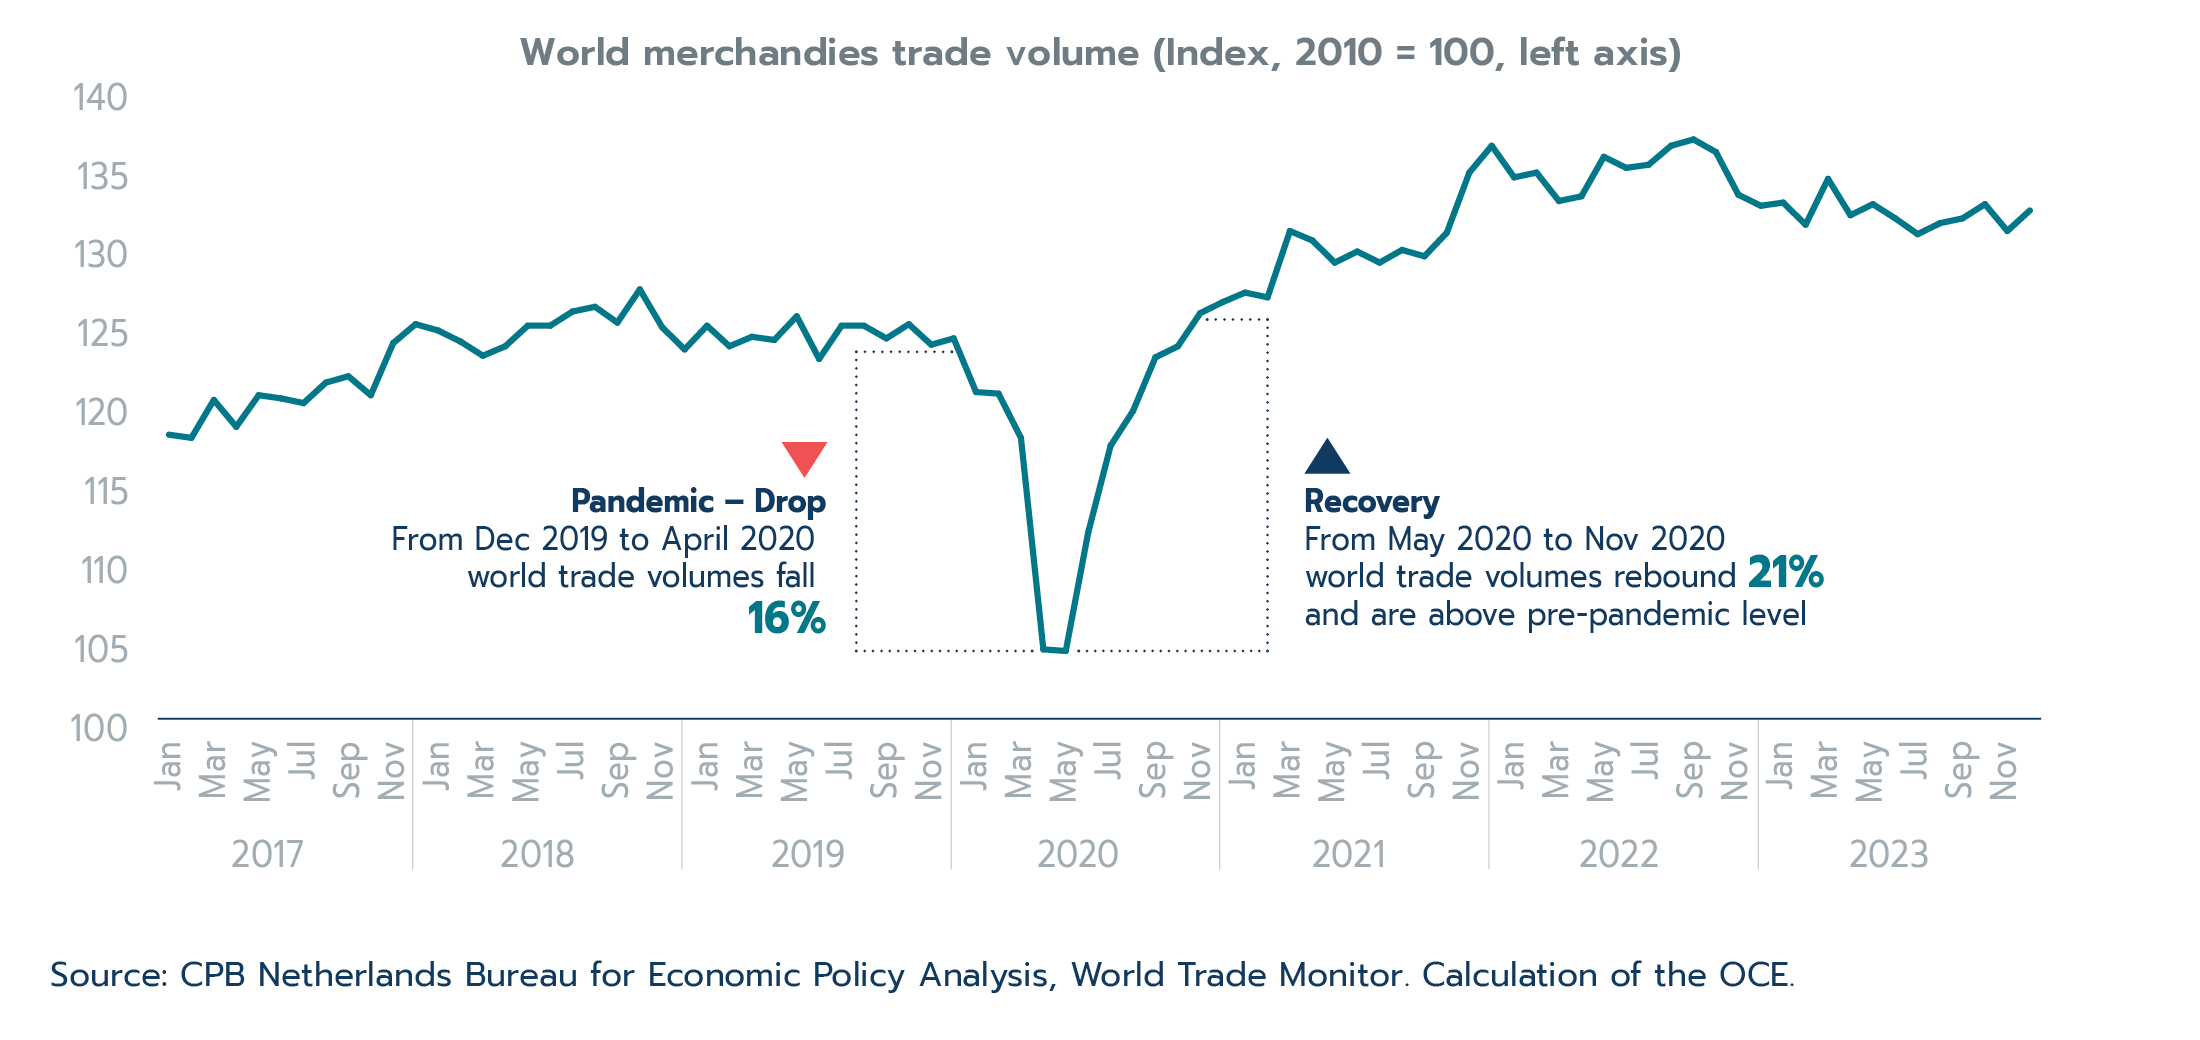 Figure 2.11: Decline and recovery in world trade